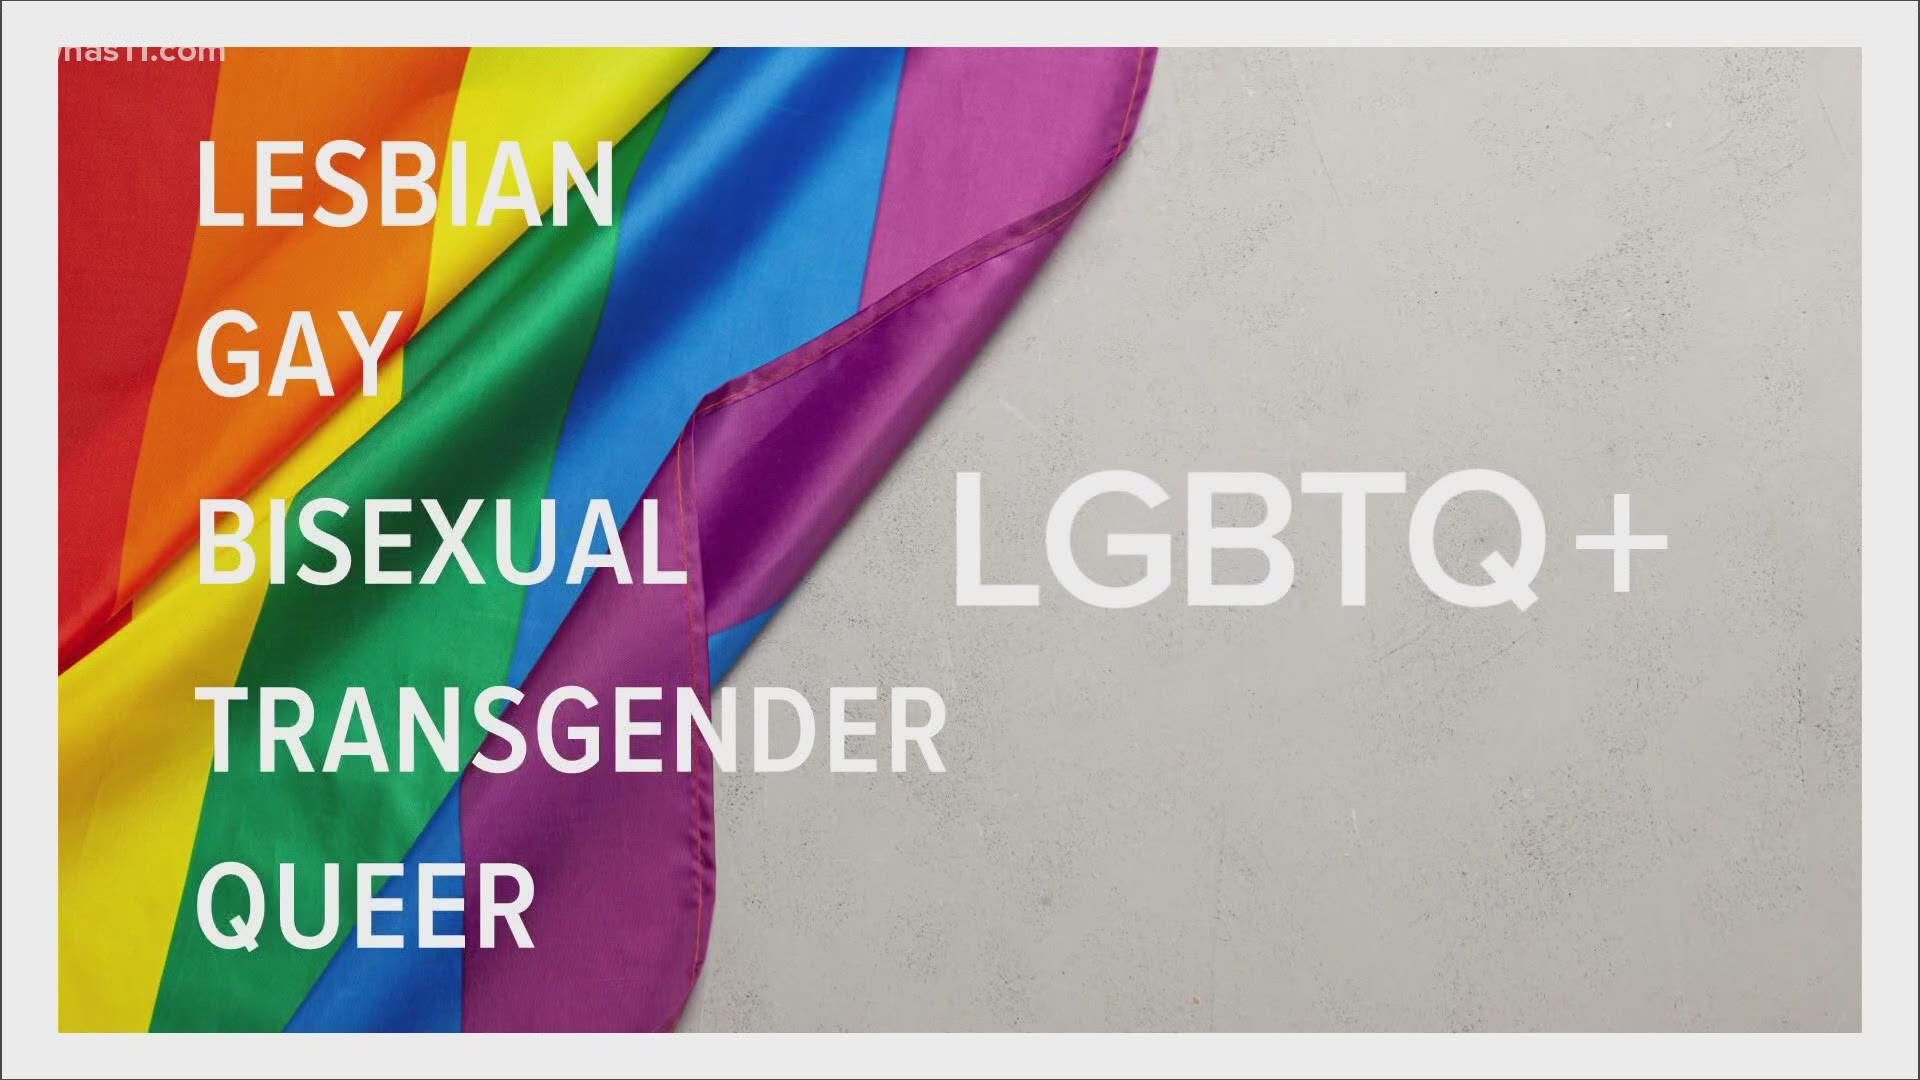 You've probably heard of "LGBT" or "LGBTQ." What do those letters mean and why do they keep changing? It's all about inclusion.